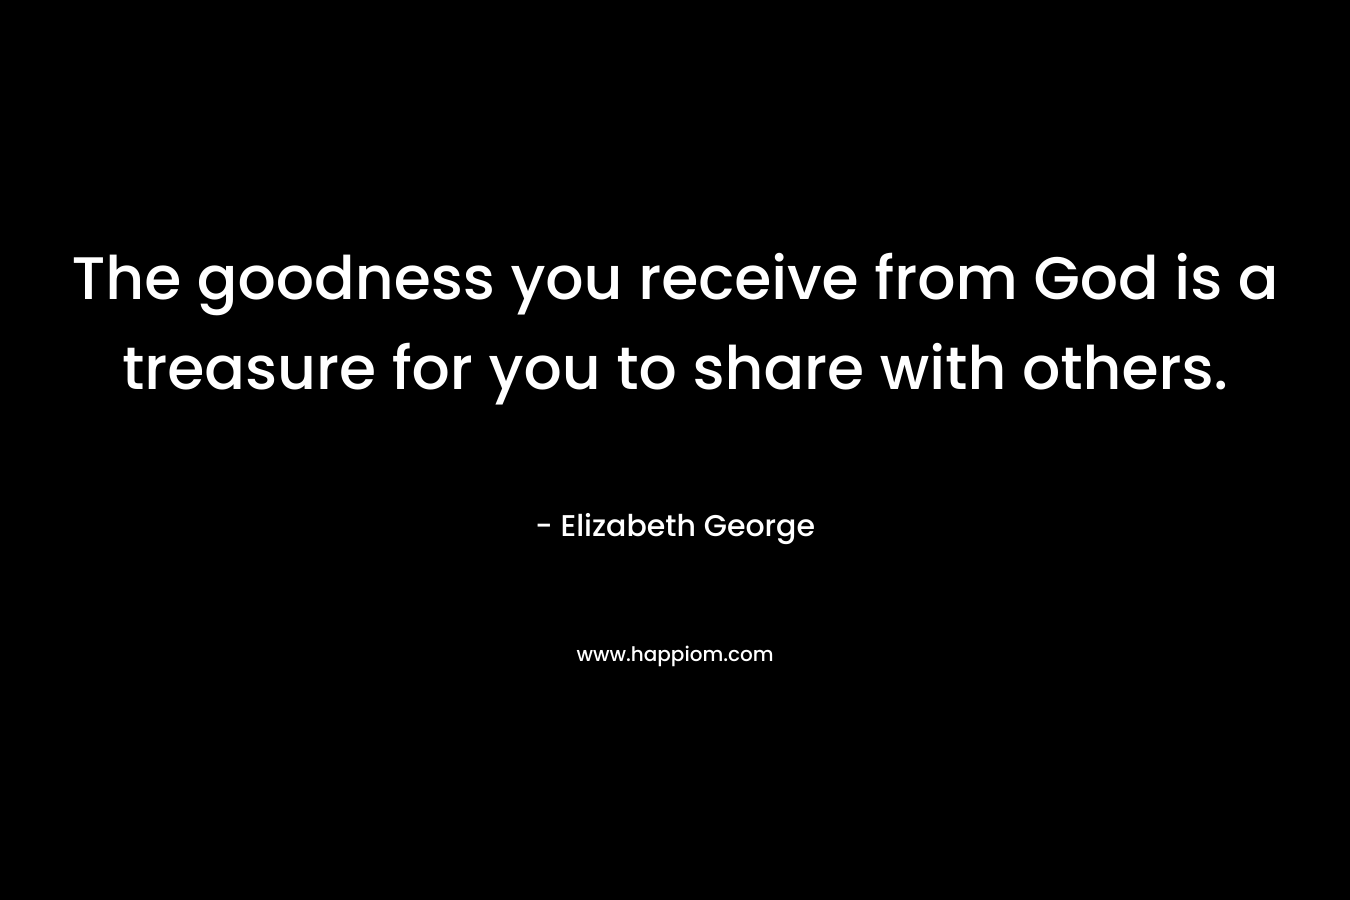 The goodness you receive from God is a treasure for you to share with others.